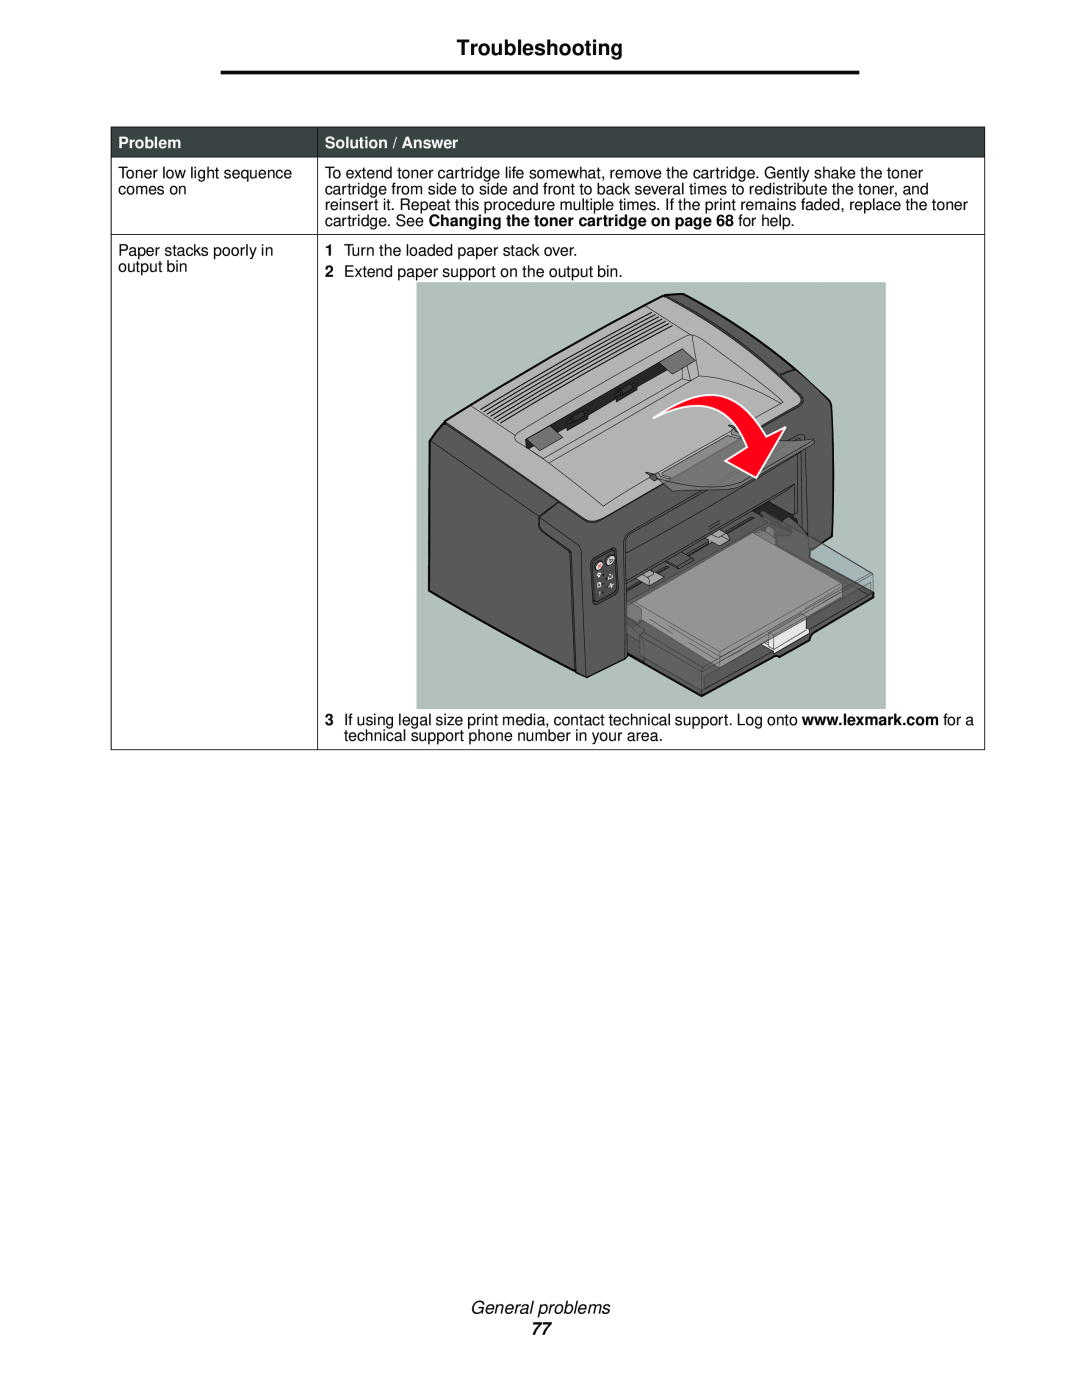 Lexmark 120 cartridge. See Changing the toner cartridge on page 68 for help, Troubleshooting, General problems, Problem 